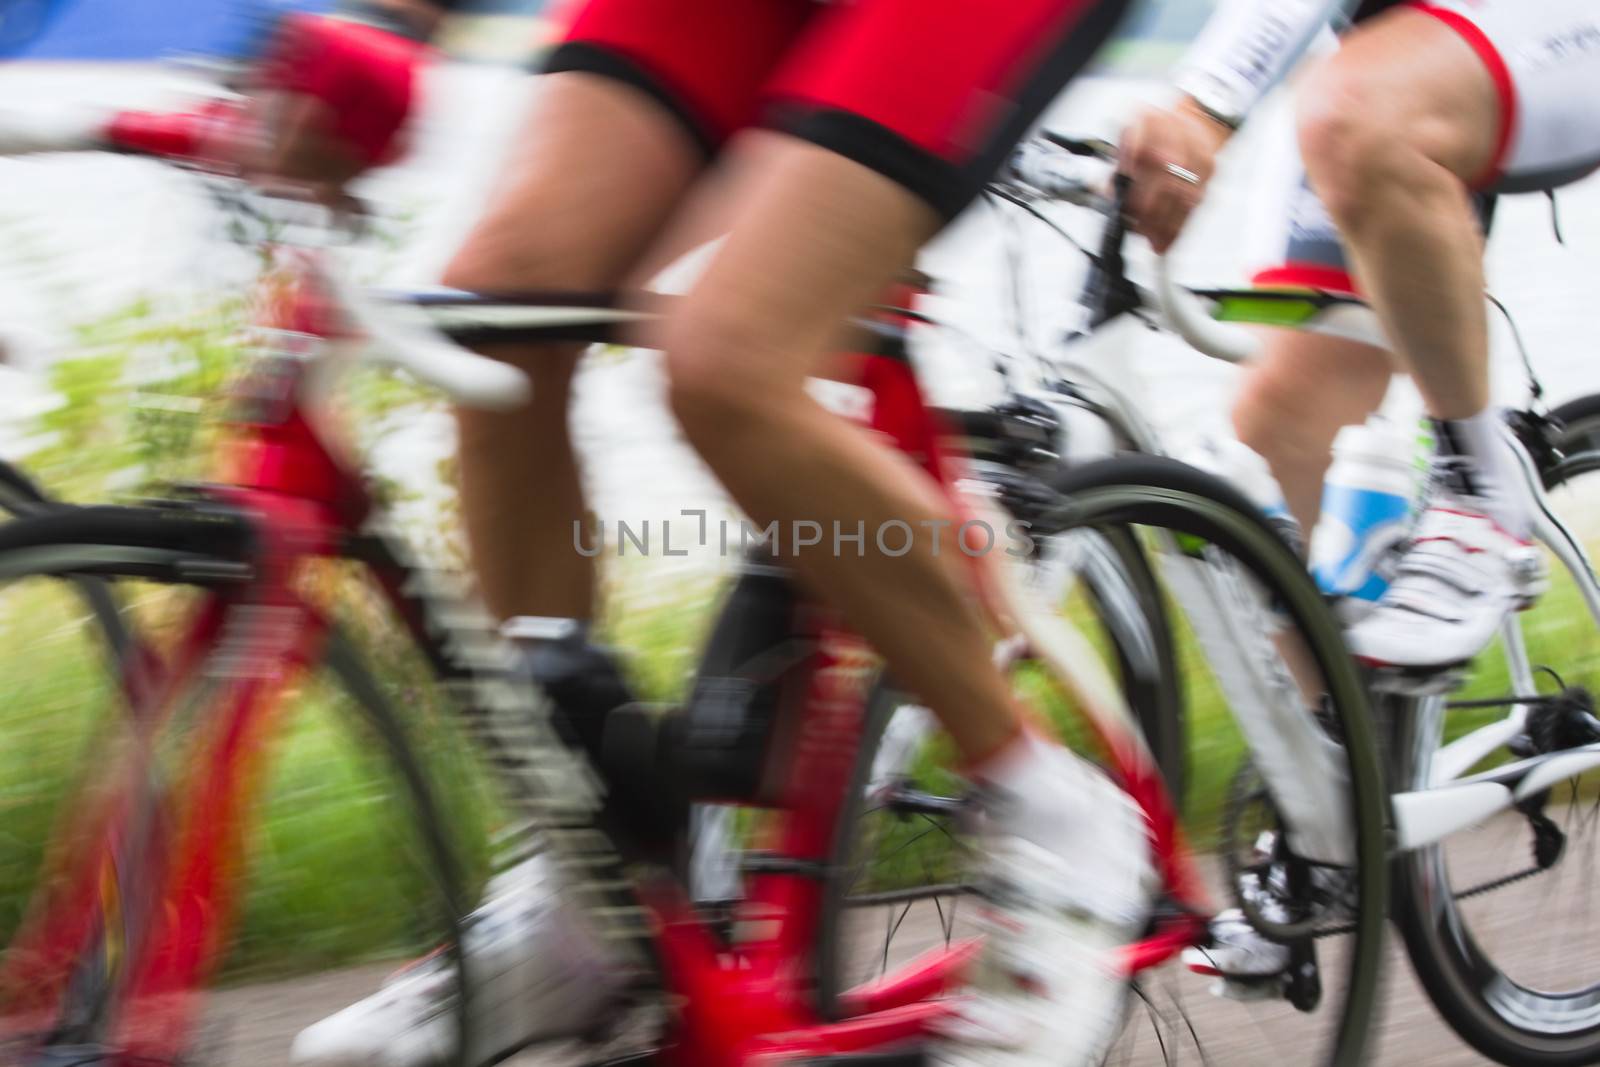 Racing cyclists at high speed by Colette